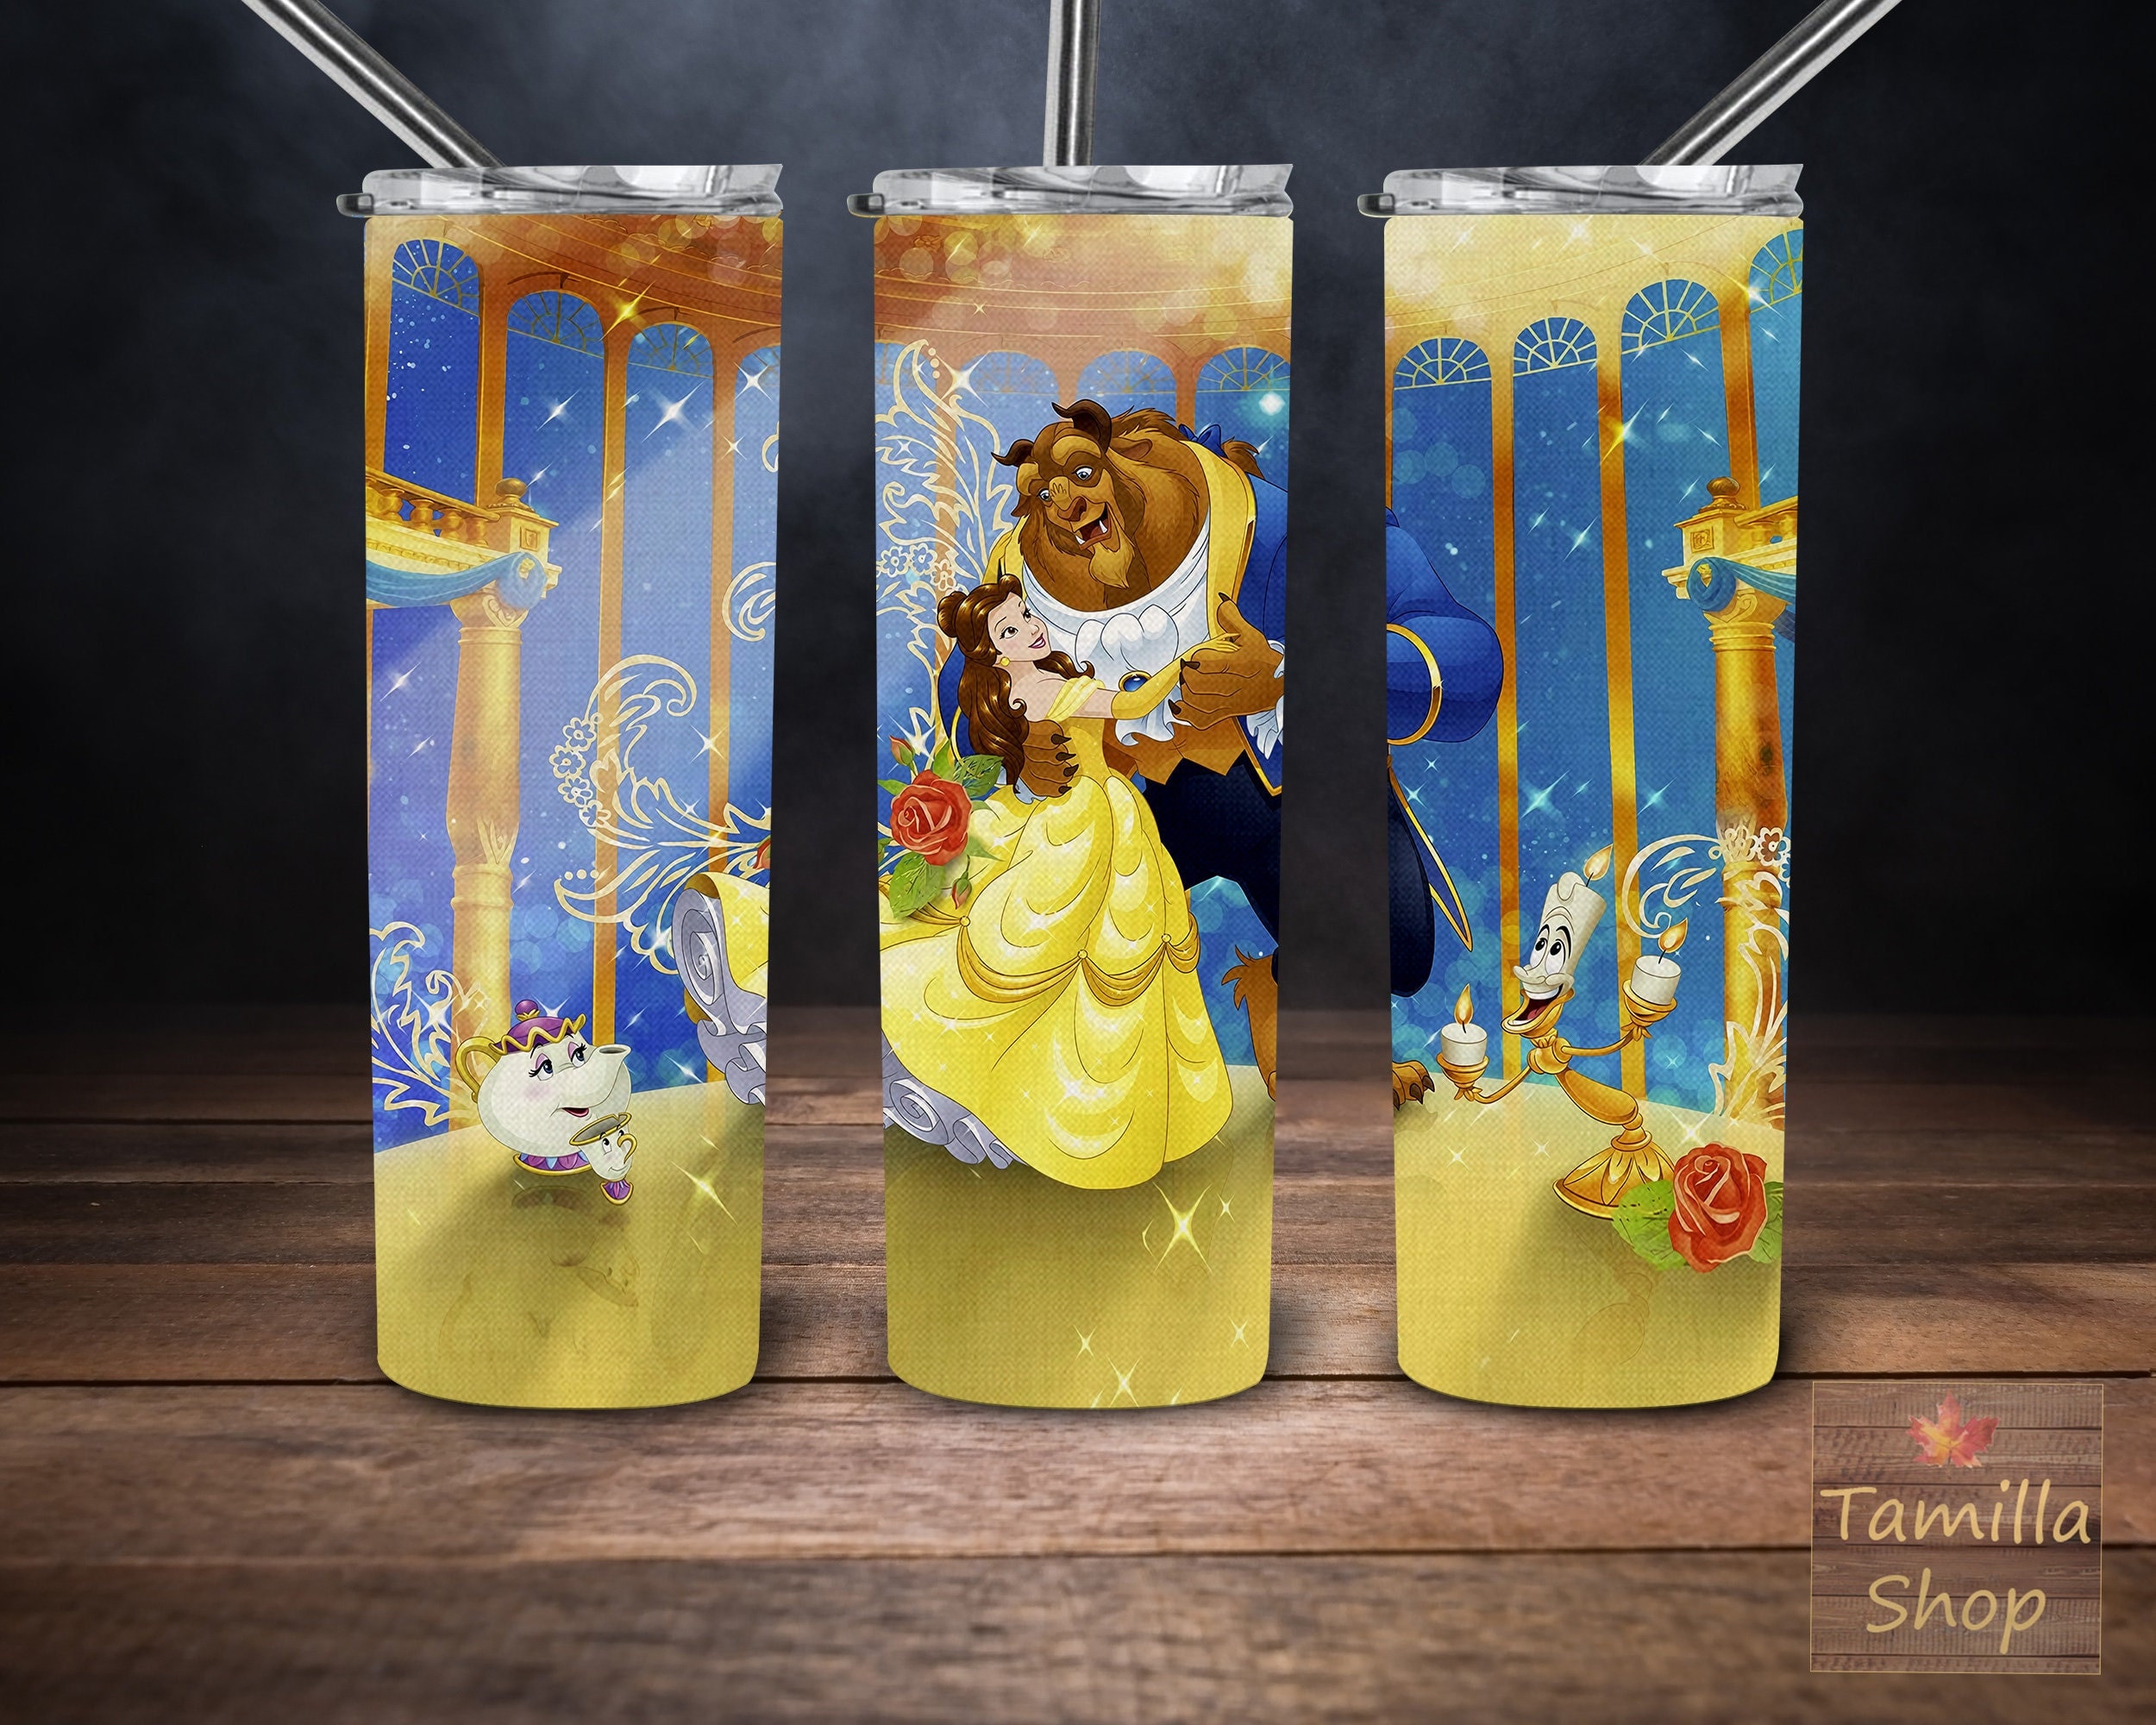 Beauty And Beast Tumbler Playful Gift - Personalized Gifts: Family, Sports,  Occasions, Trending